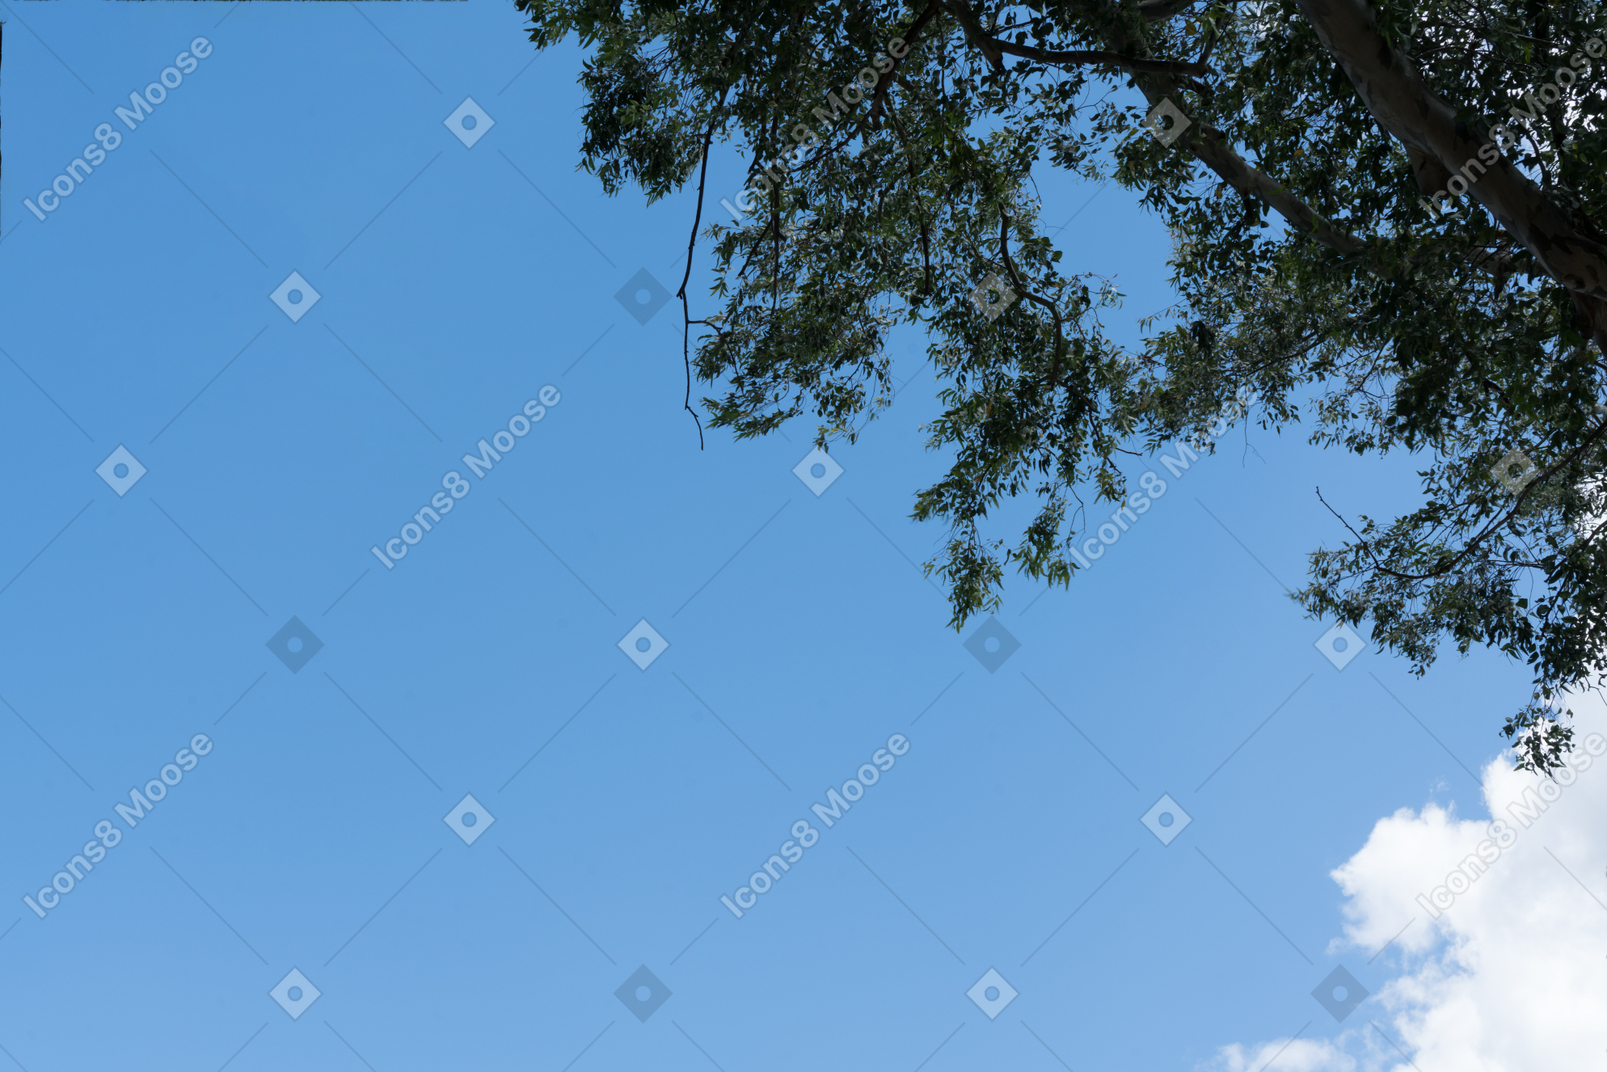 The view of the sky and tree above